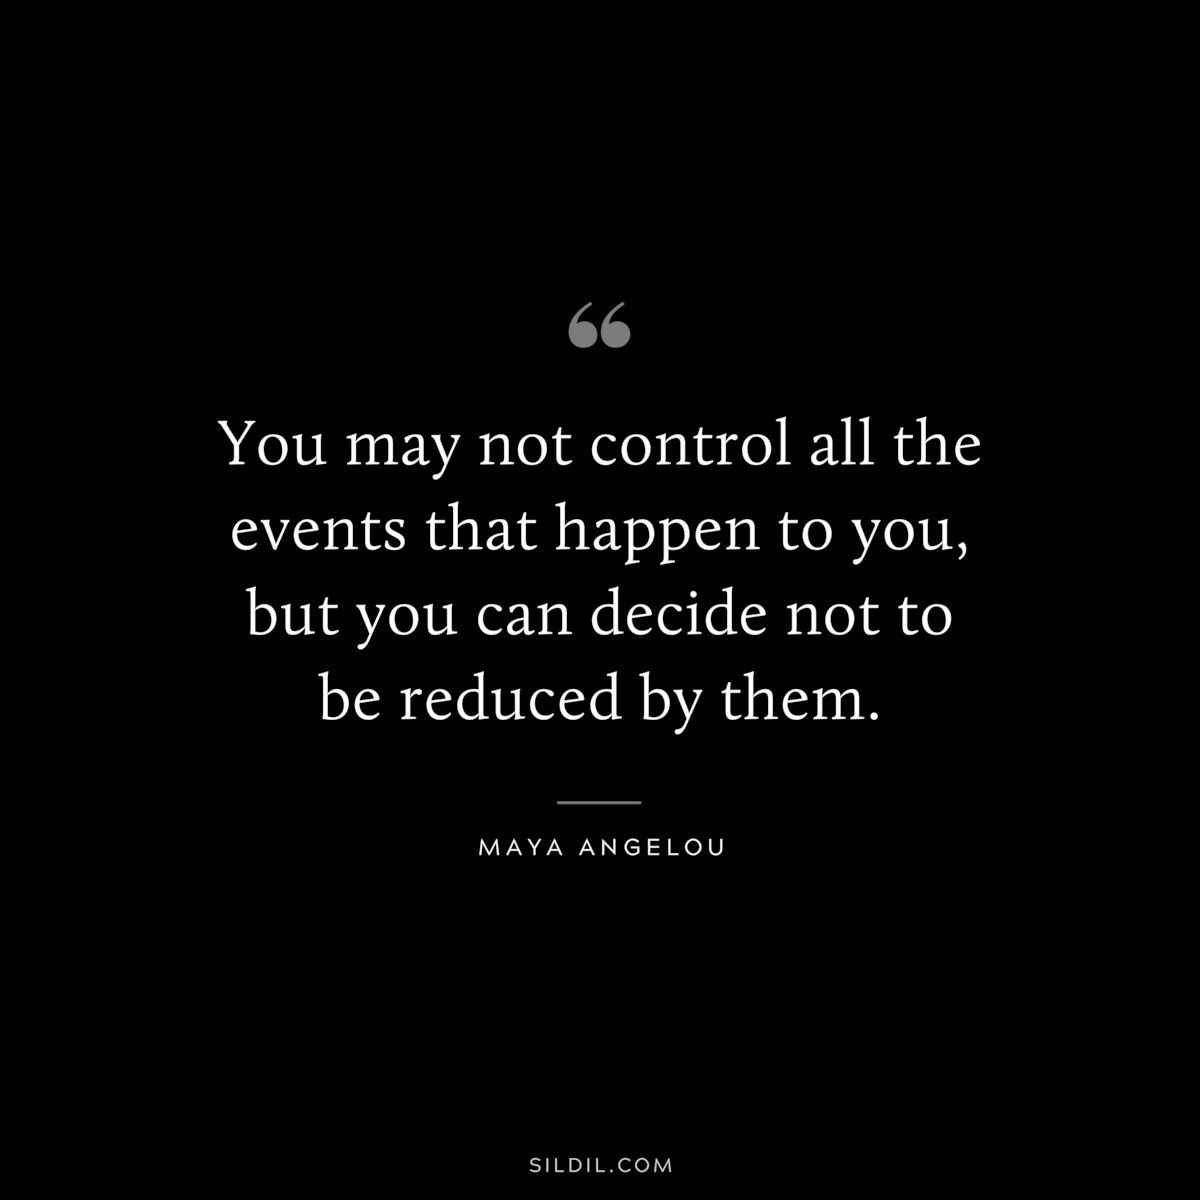 You may not control all the events that happen to you, but you can decide not to be reduced by them. ― Maya Angelou